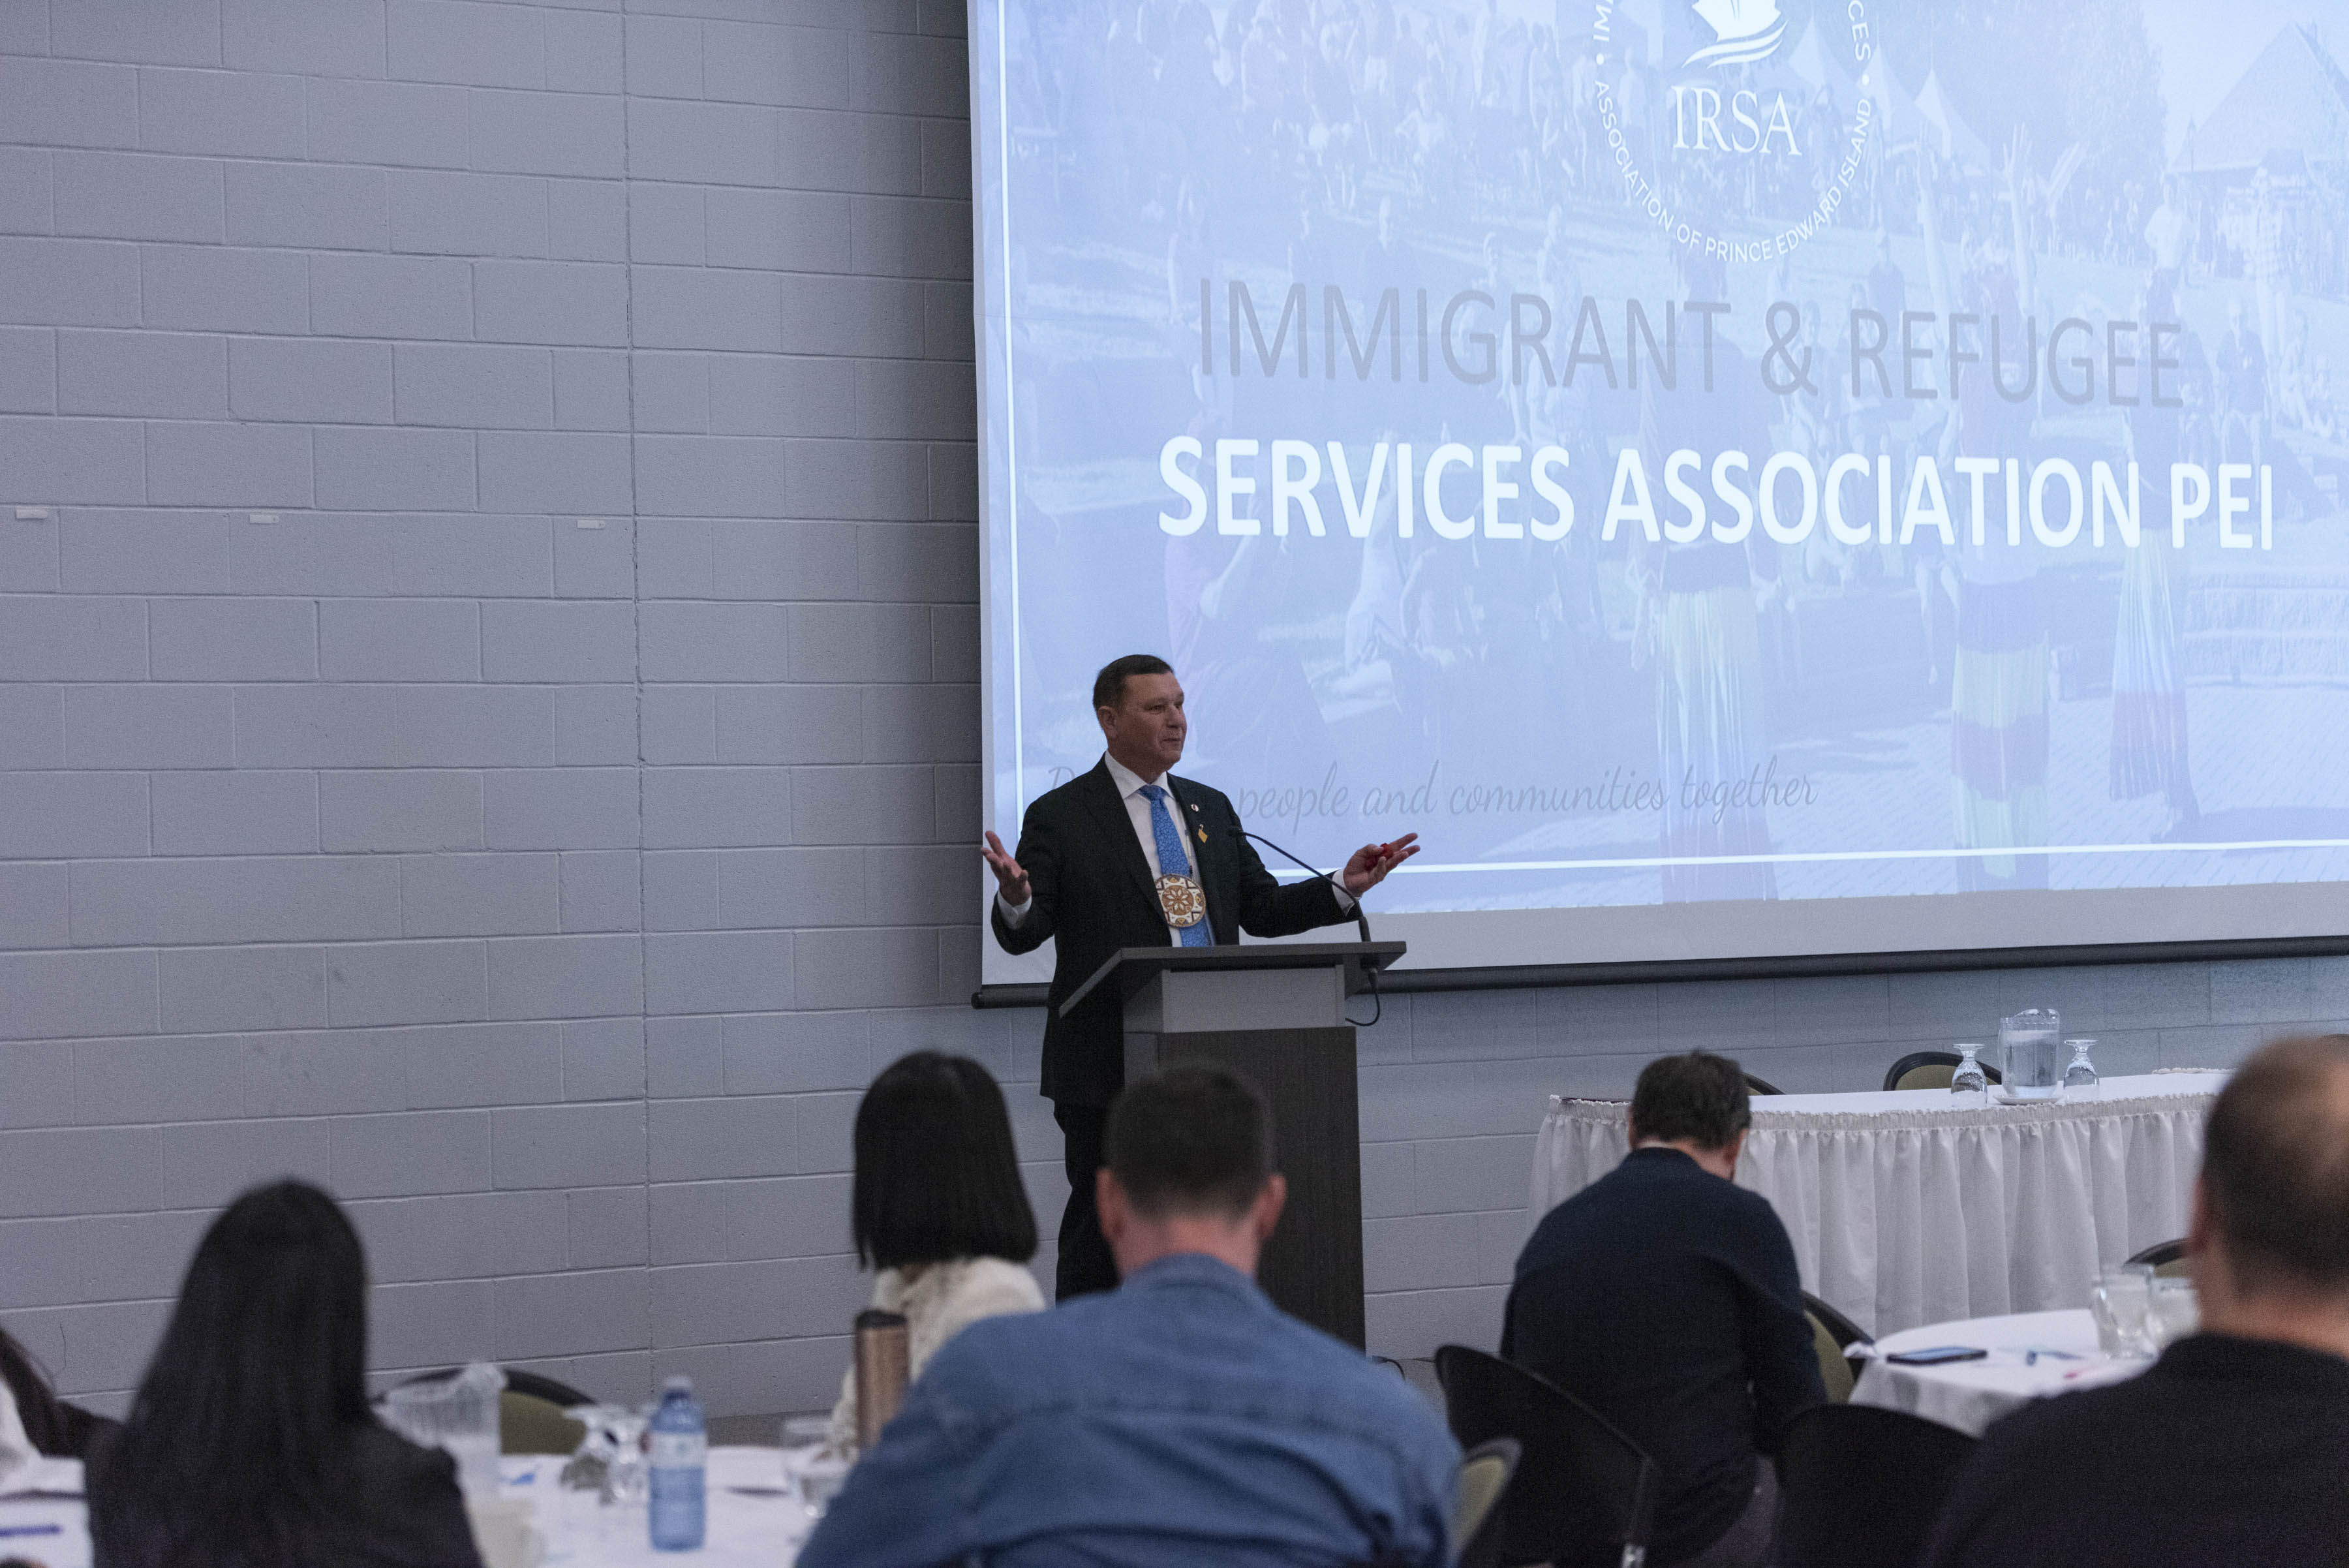 Friday, May 12, 2023 – Senator Brian Francis delivers a keynote speech on the topic of reconciliation during a celebration to mark the opening of a new office in Summerside, Prince Edward Island, by the Immigrant and Refugee Services Association PEI.